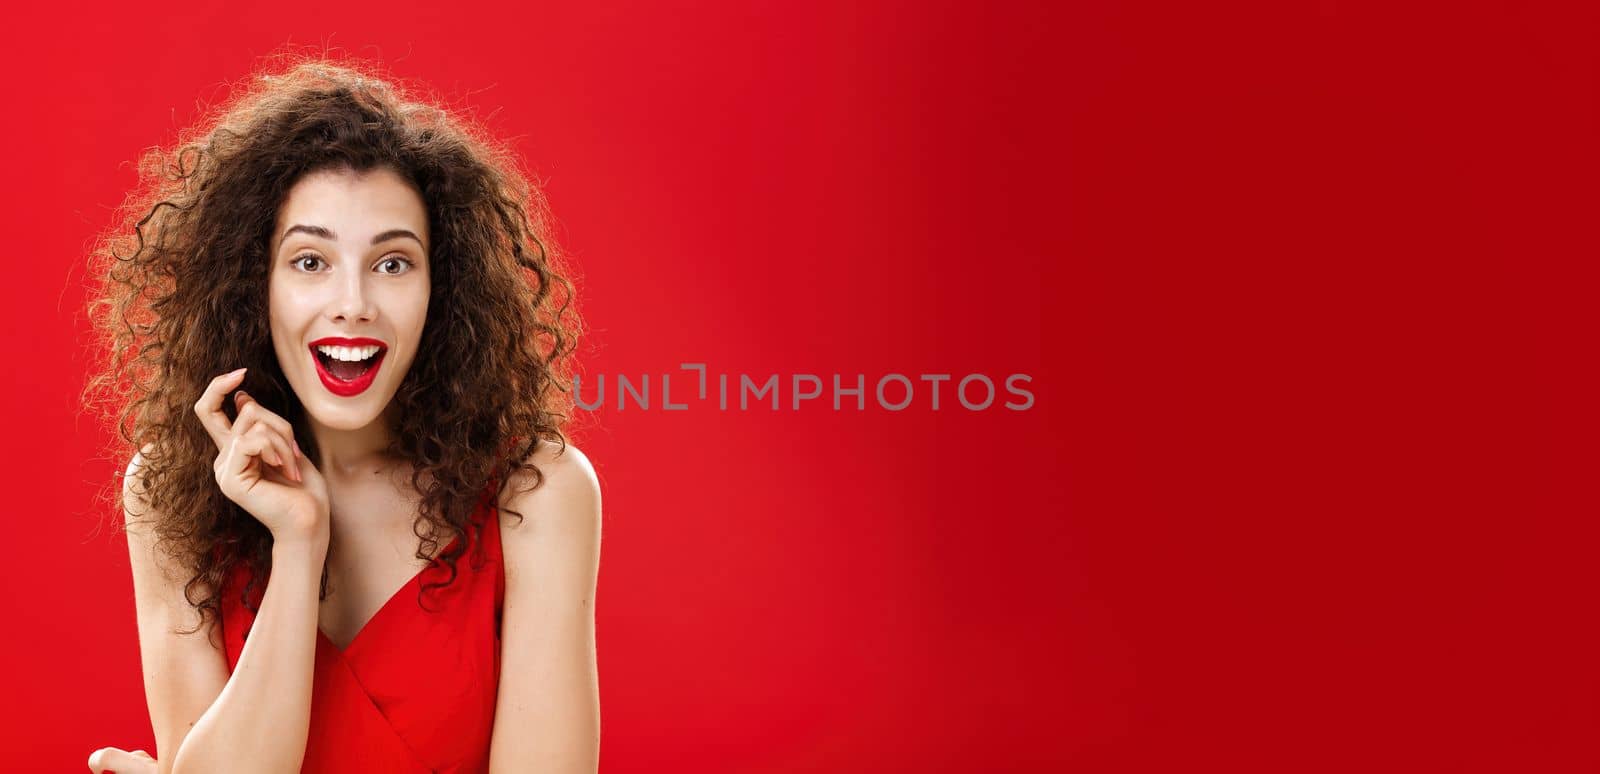 Impressed and excited feminine adult woman with curly hair in red lipstic and elegant evening dress gasping and smiling with surprised, amazed look playing with hair strand listening carefully story. Emotions concept